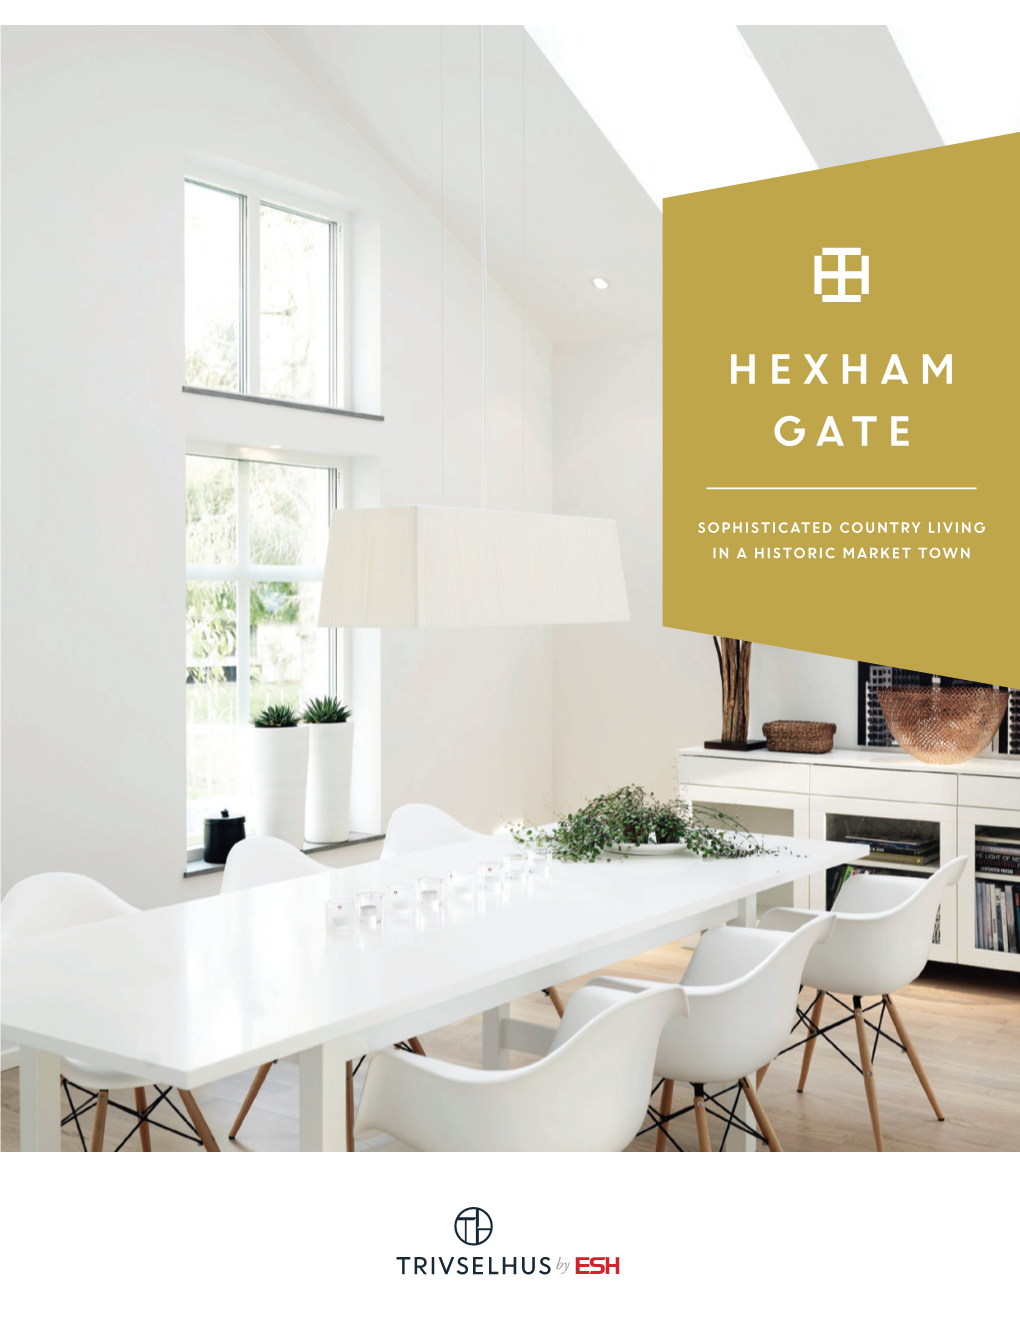 Hexham Gate Is an Exclusive Collection of Sixteen Beautiful Family Homes That Combine a Stunning Country Setting with Scandinavian- Inspired Style